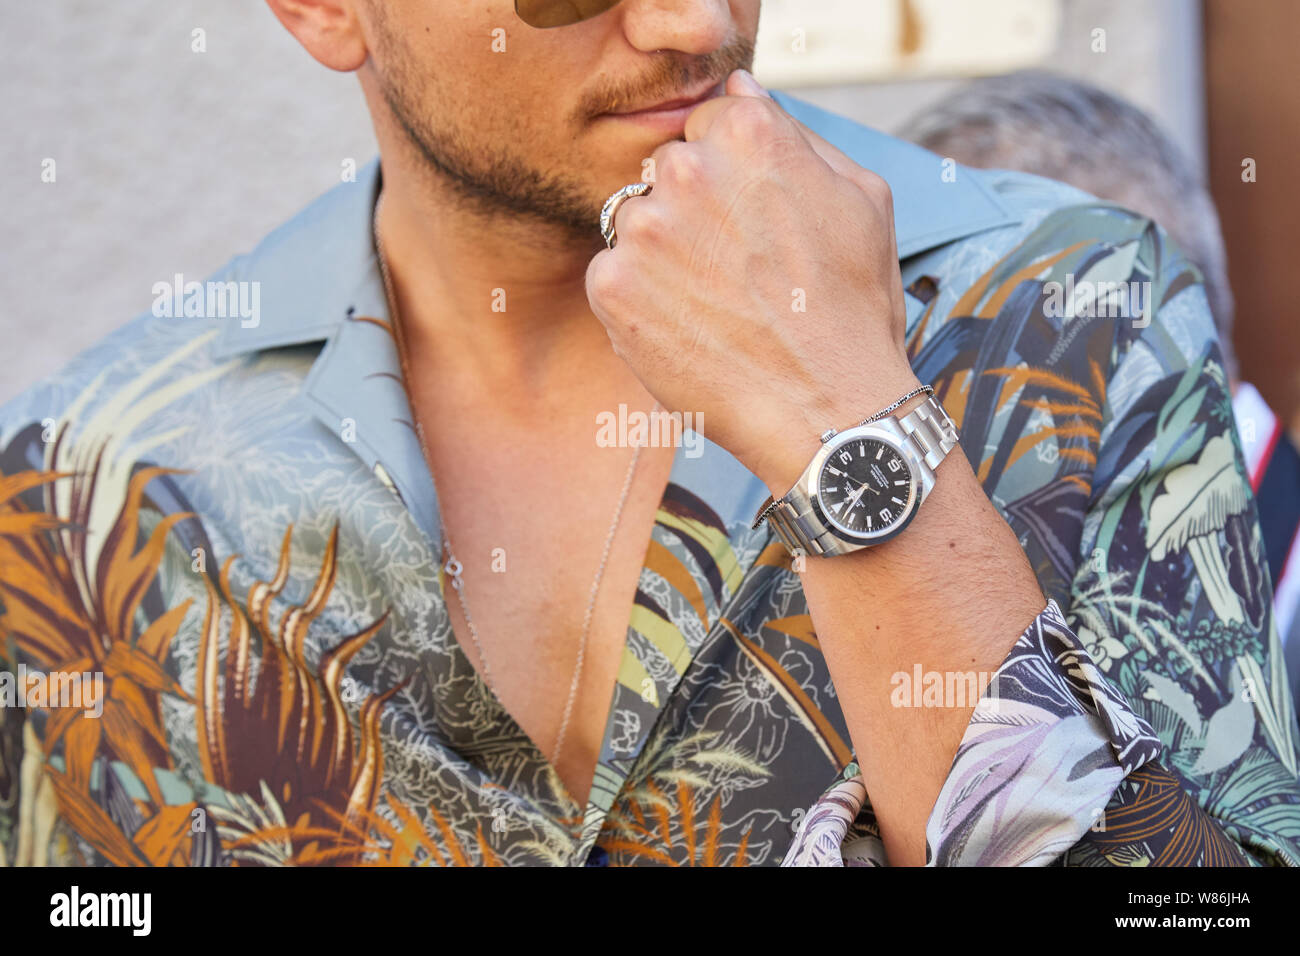 MILAN, ITALY - JUNE 16, 2019: Man with Rolex Explorer watch and shirt ...